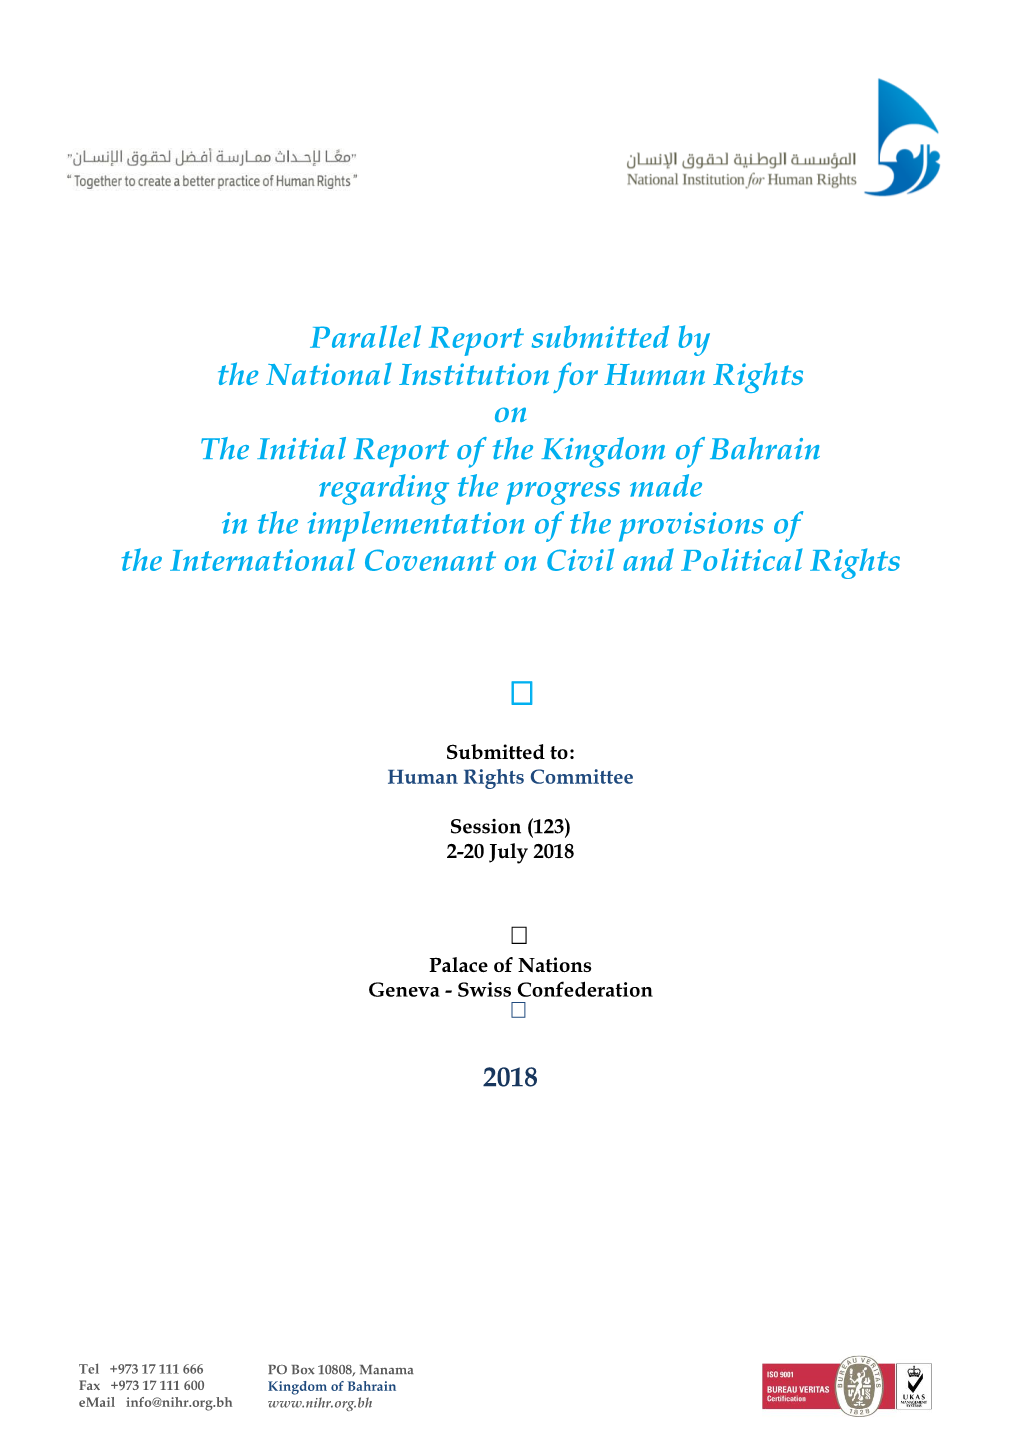 Parallel Report Submitted by the National Institution for Human